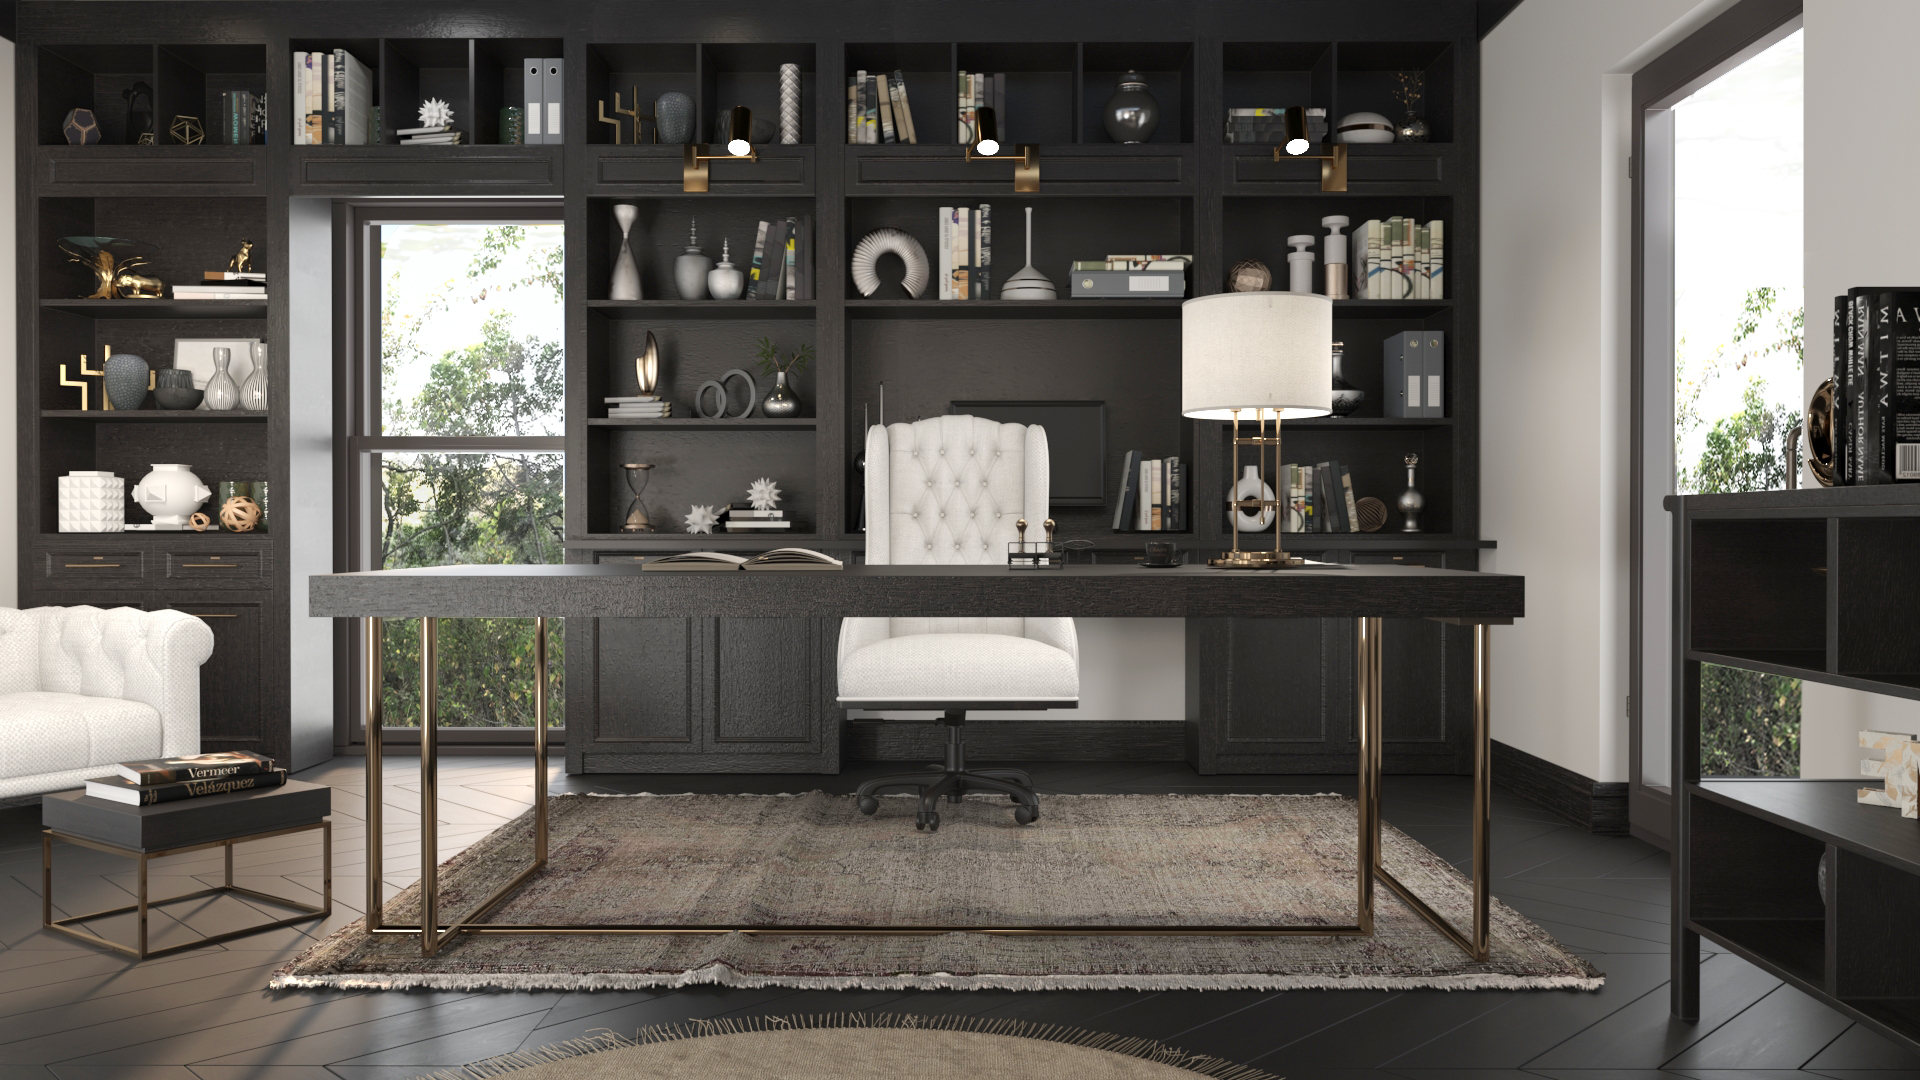 Elegant Affluence: Embracing French-Inspired Traditional Charm in Your Home Office